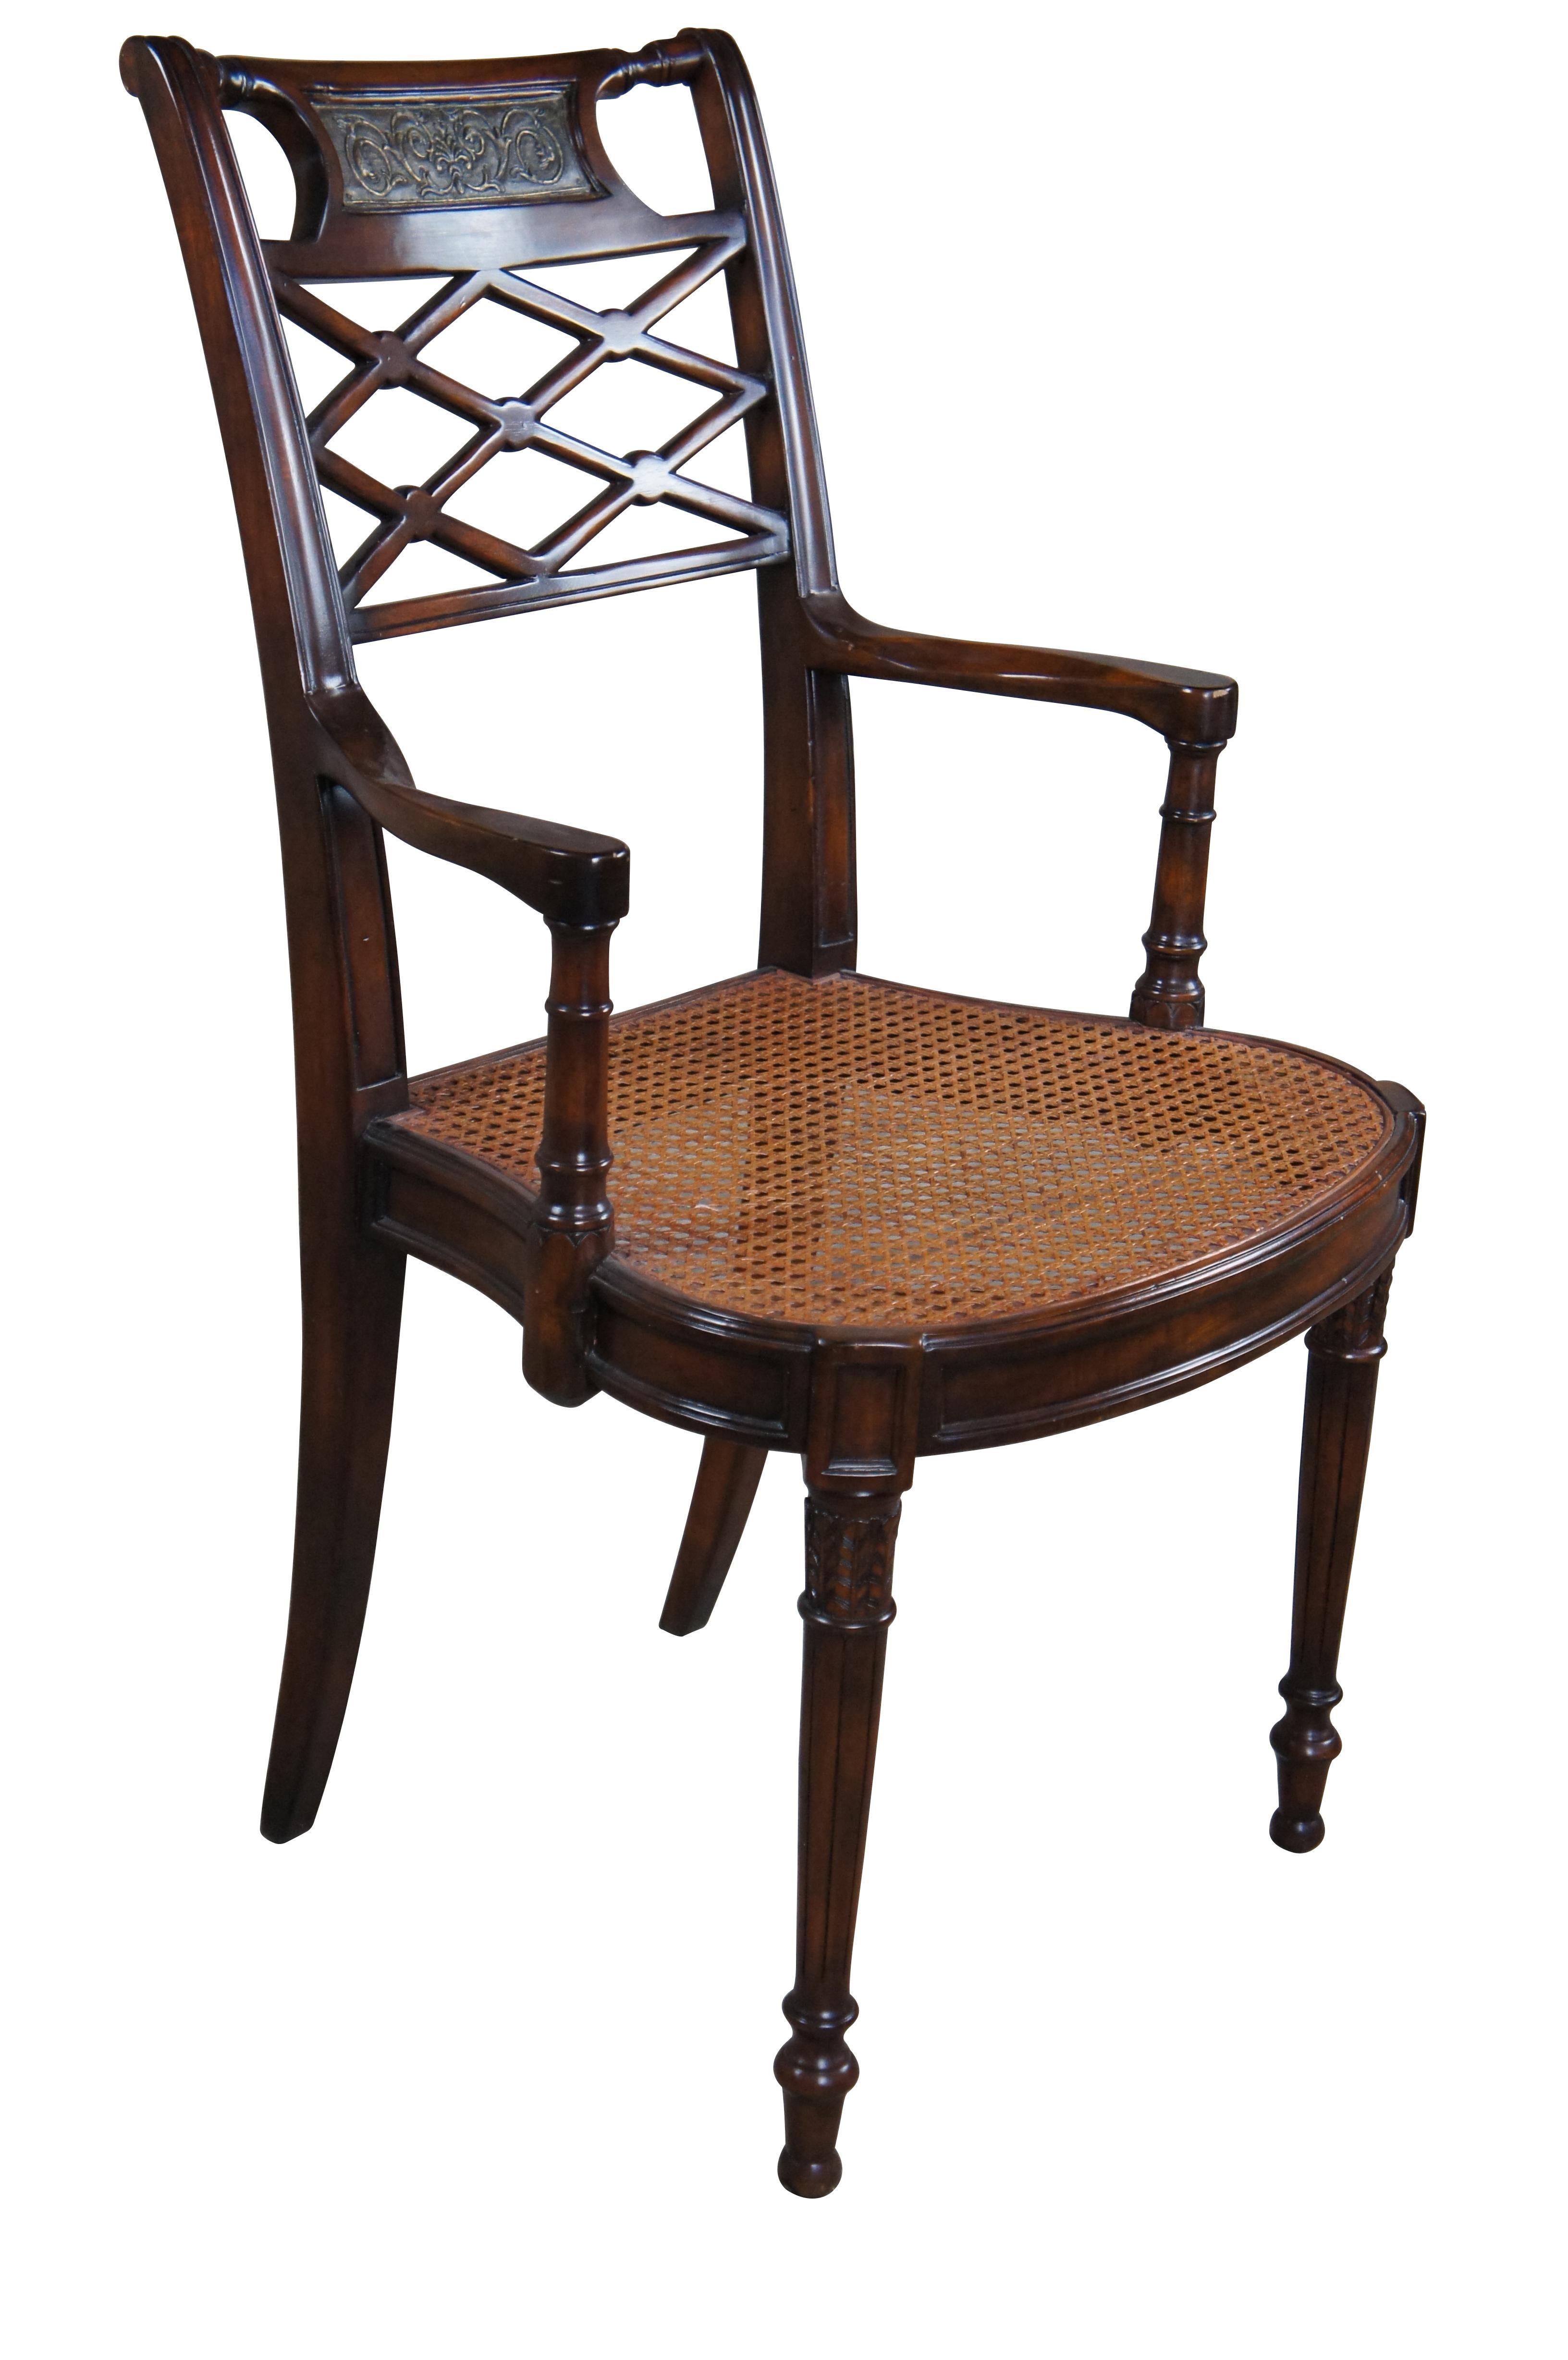 Theodore Alexander Louis XVI Style Mahogany Bronze Repousse Lattice Arm Chair In Excellent Condition For Sale In Dayton, OH